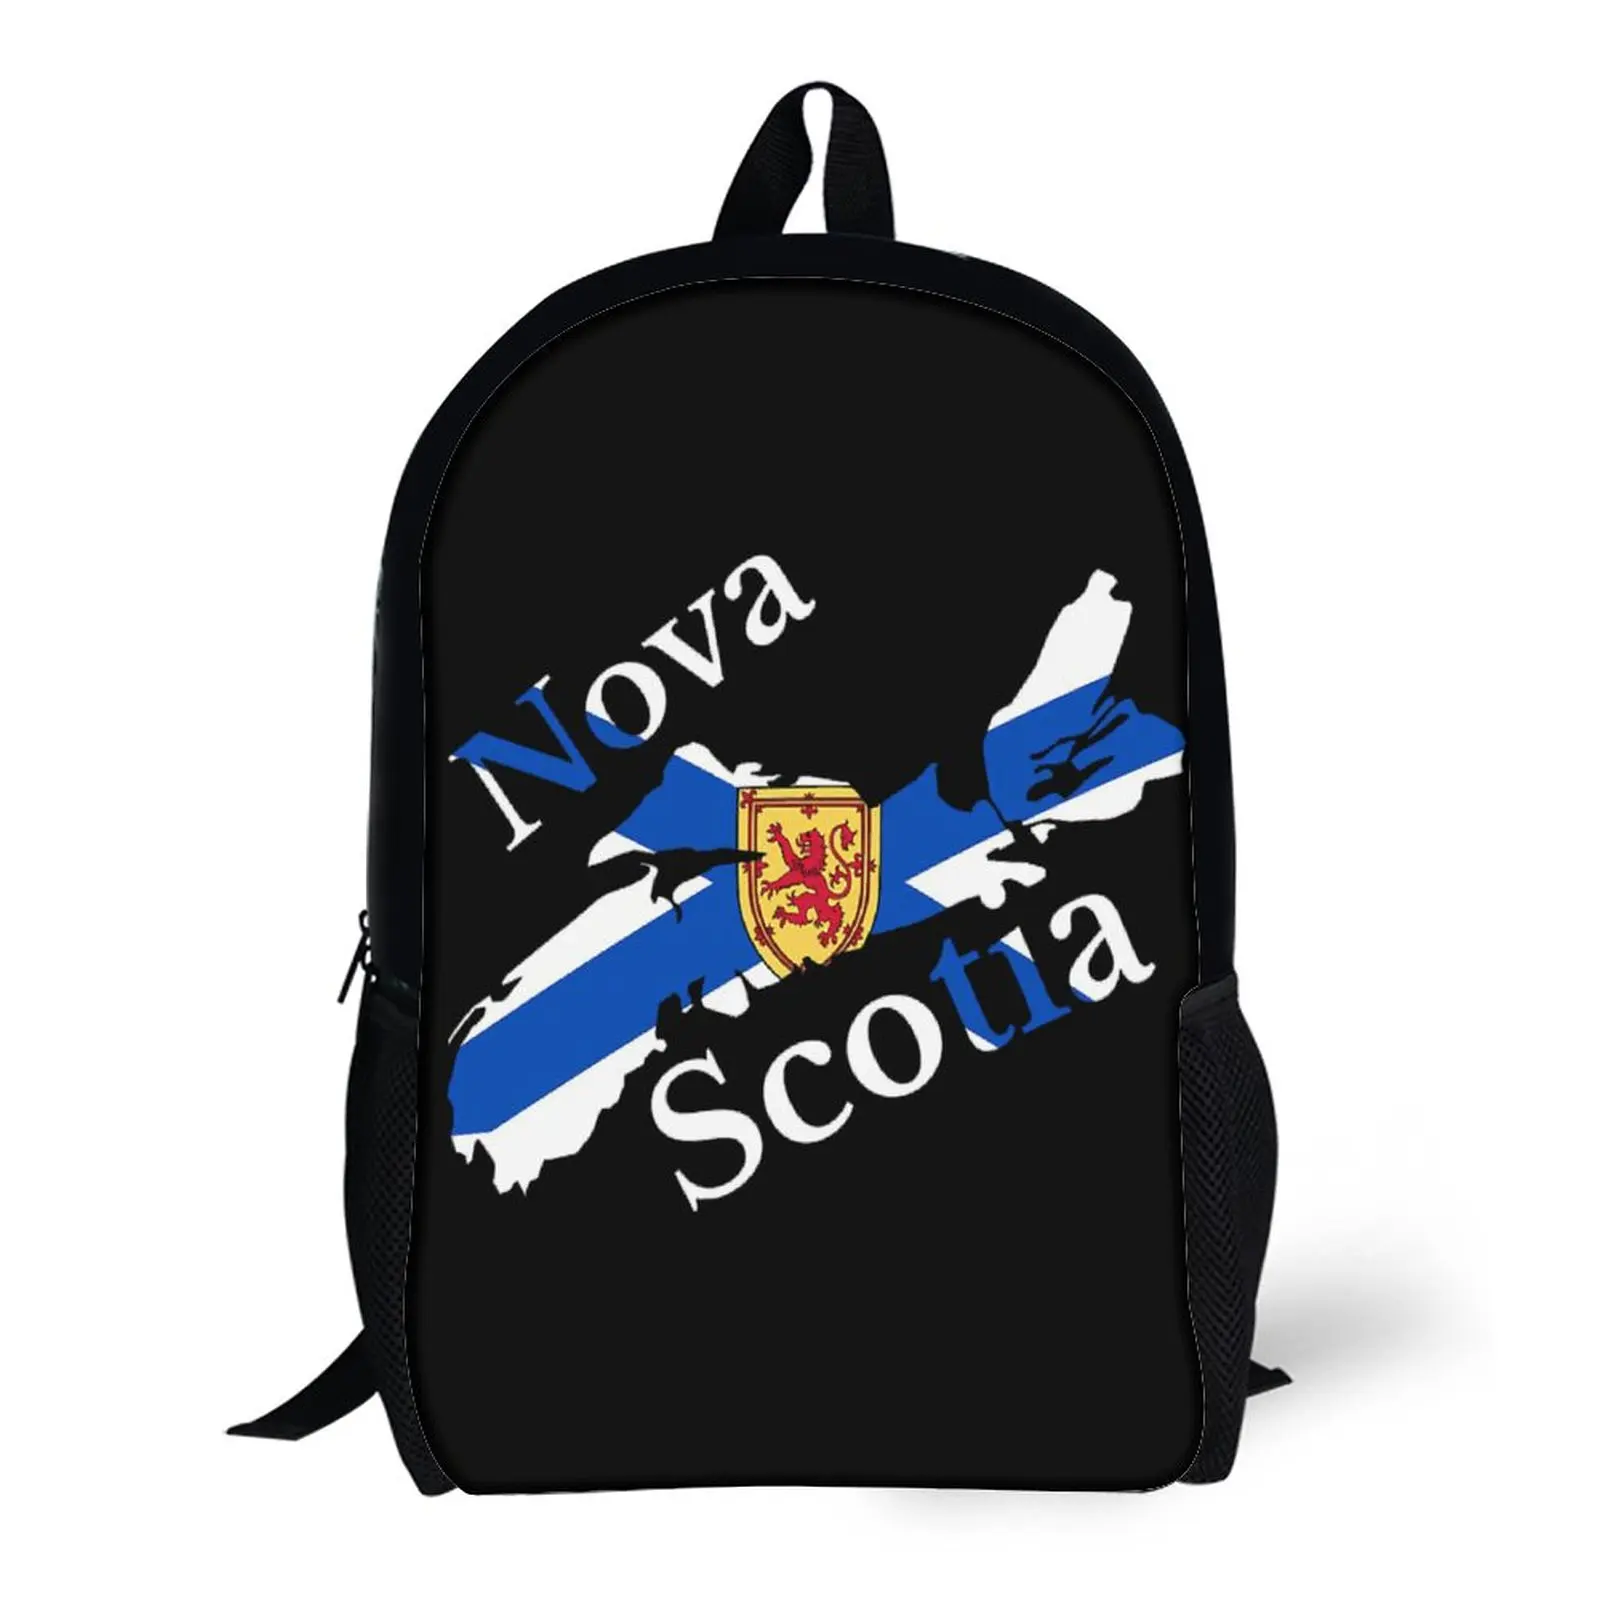 

Nova Scotia Flag Map, NS, Canada 17 Inch Shoulder Backpack Vintage Schools Casual Graphic Lasting Comfortable Field Pack